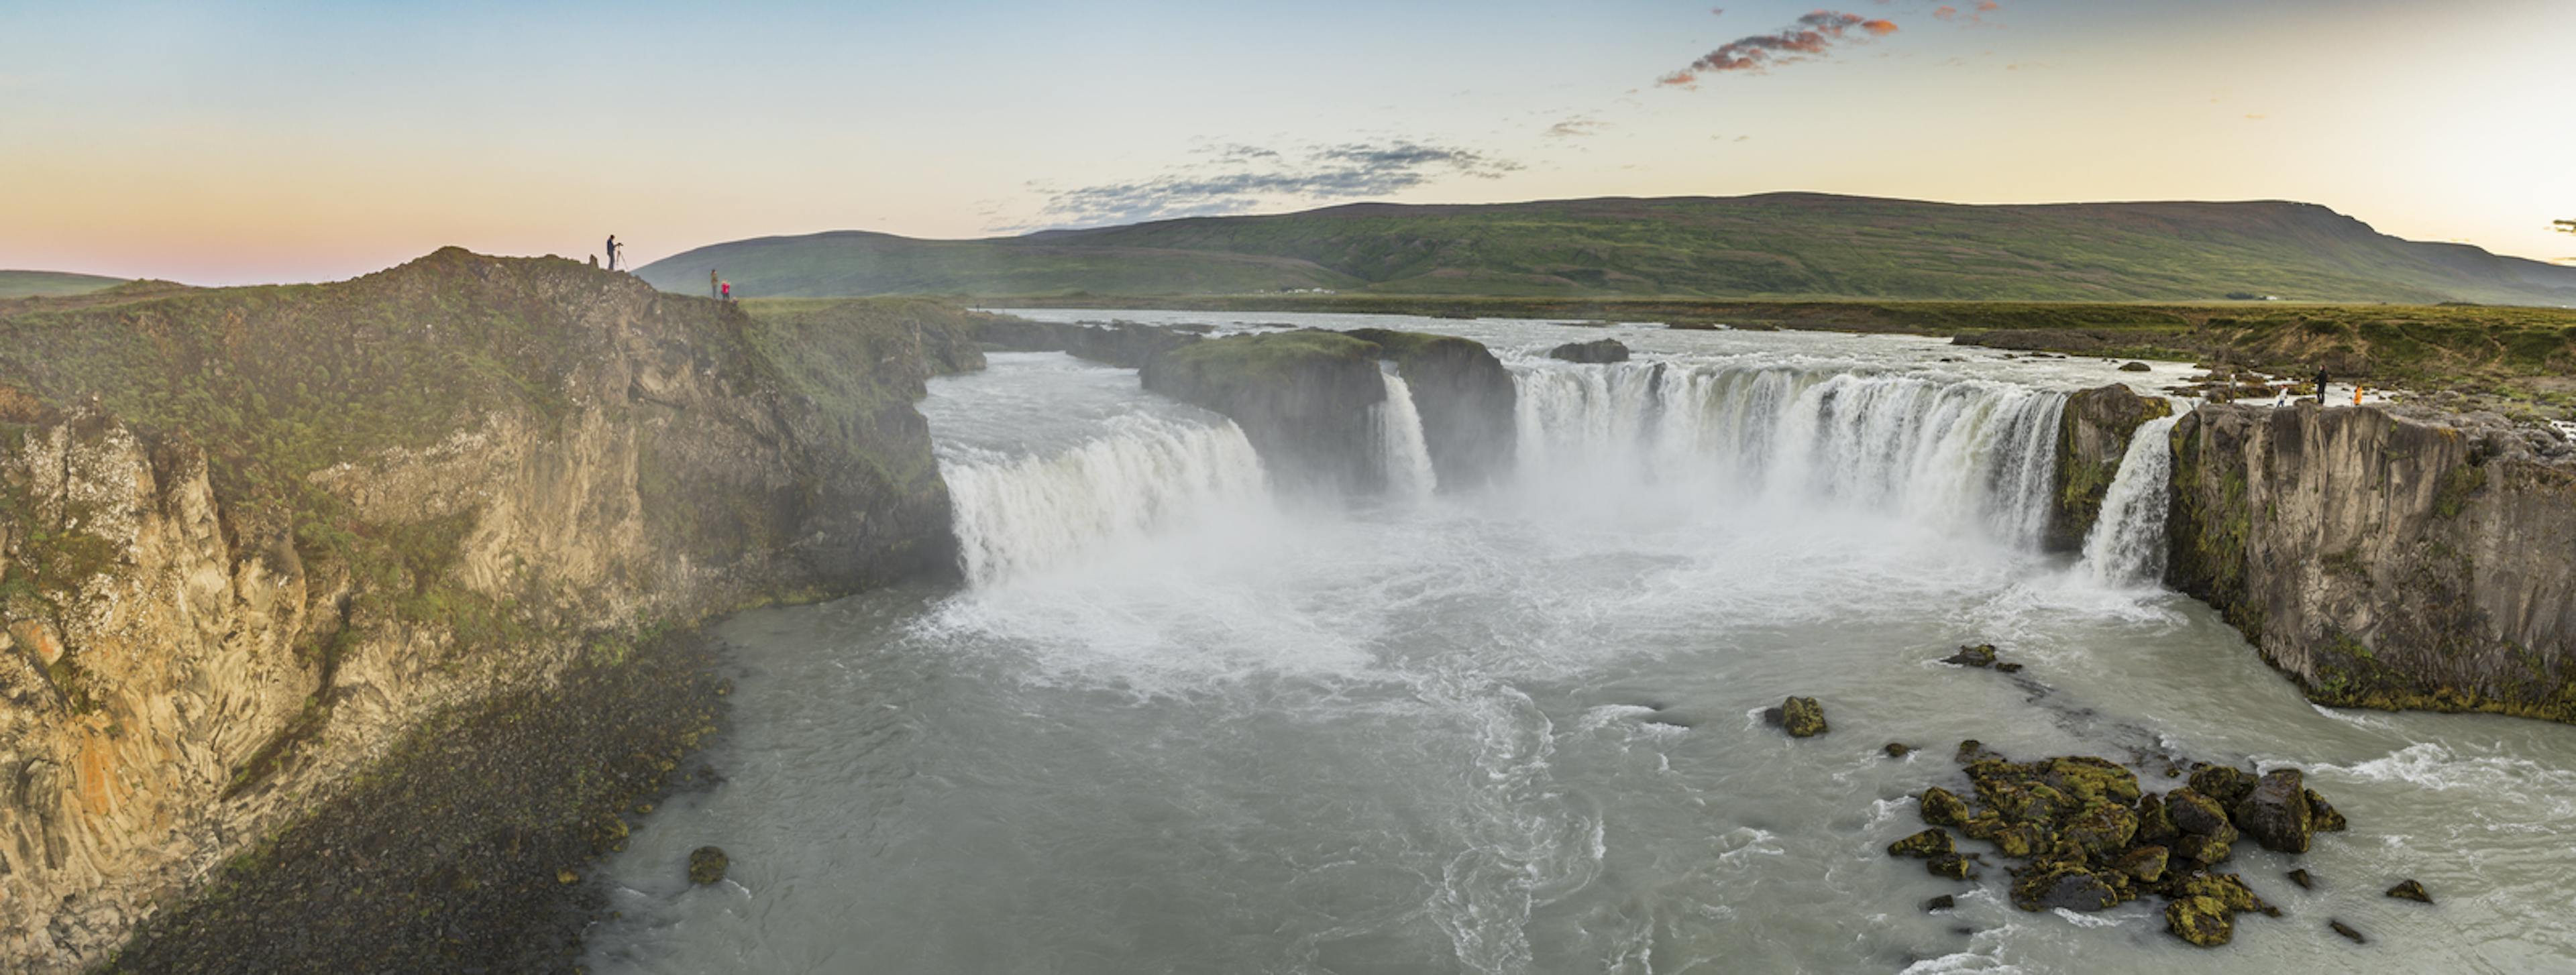 Goðafoss Waterfall in Iceland 